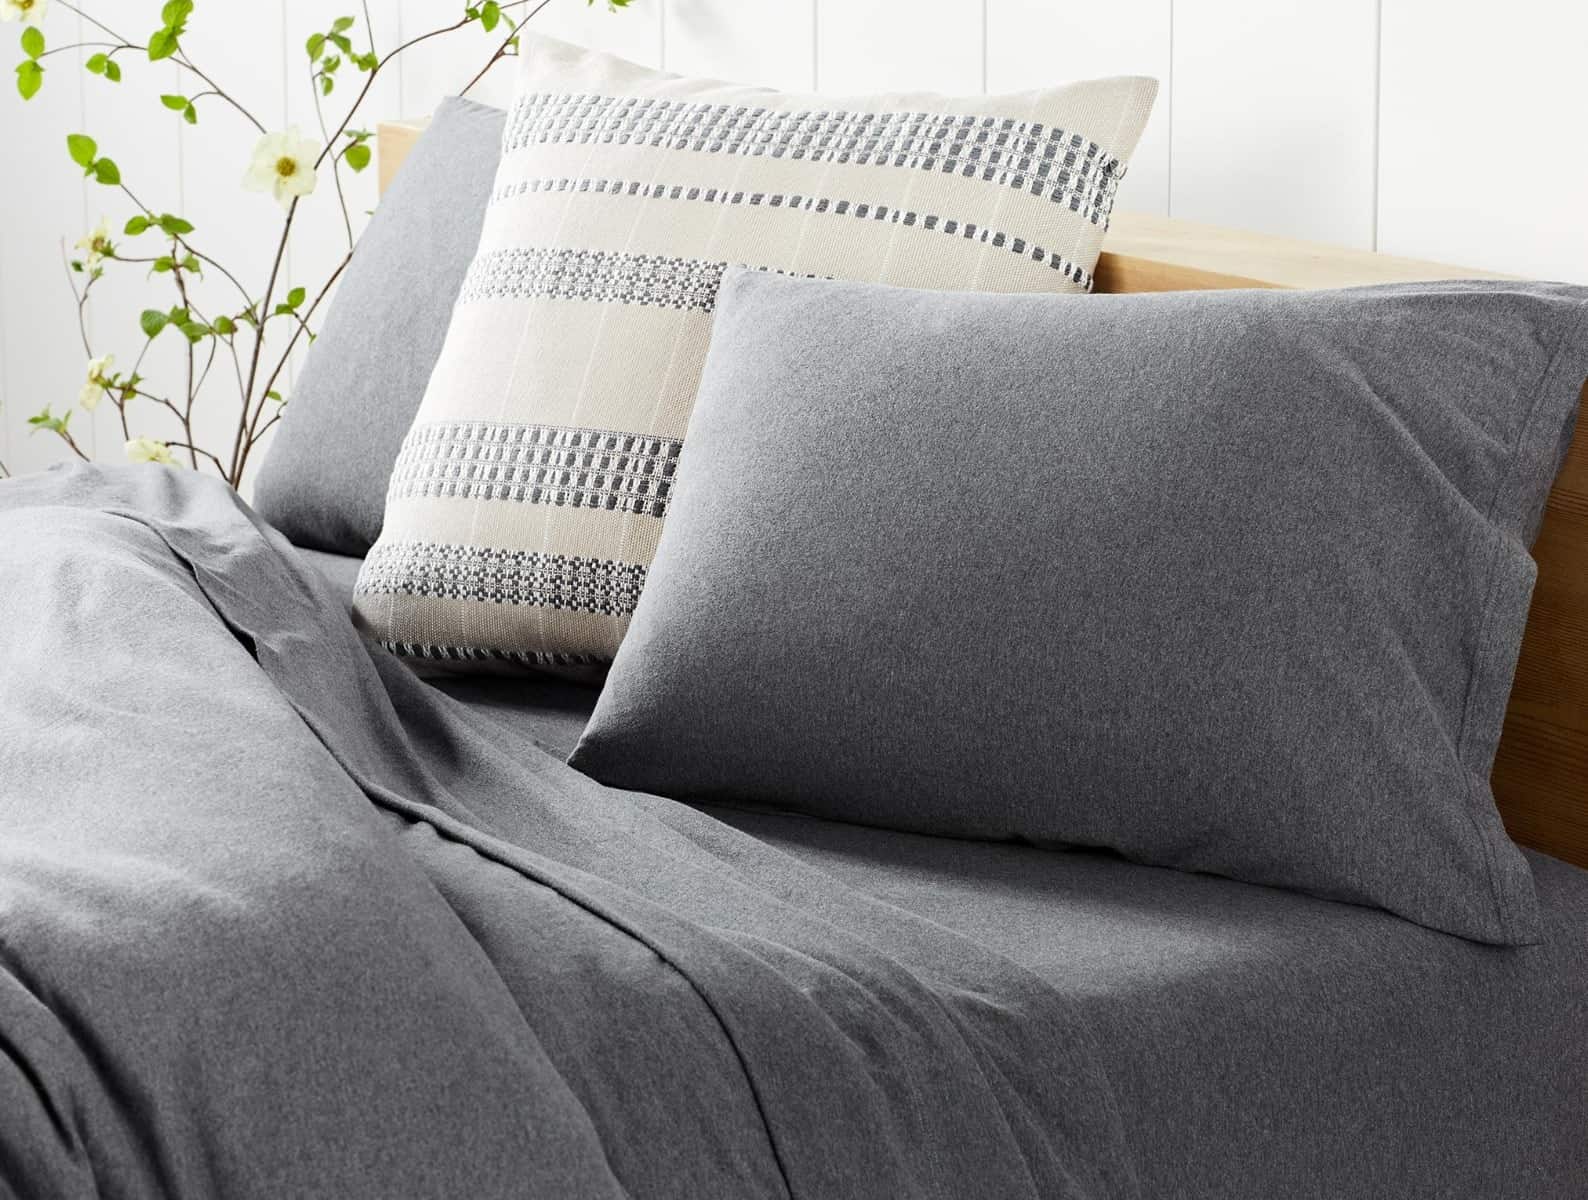 Charcoal Colored Jersey Sheets Are A Wonderful Pick For A Monochrome Aesthetic